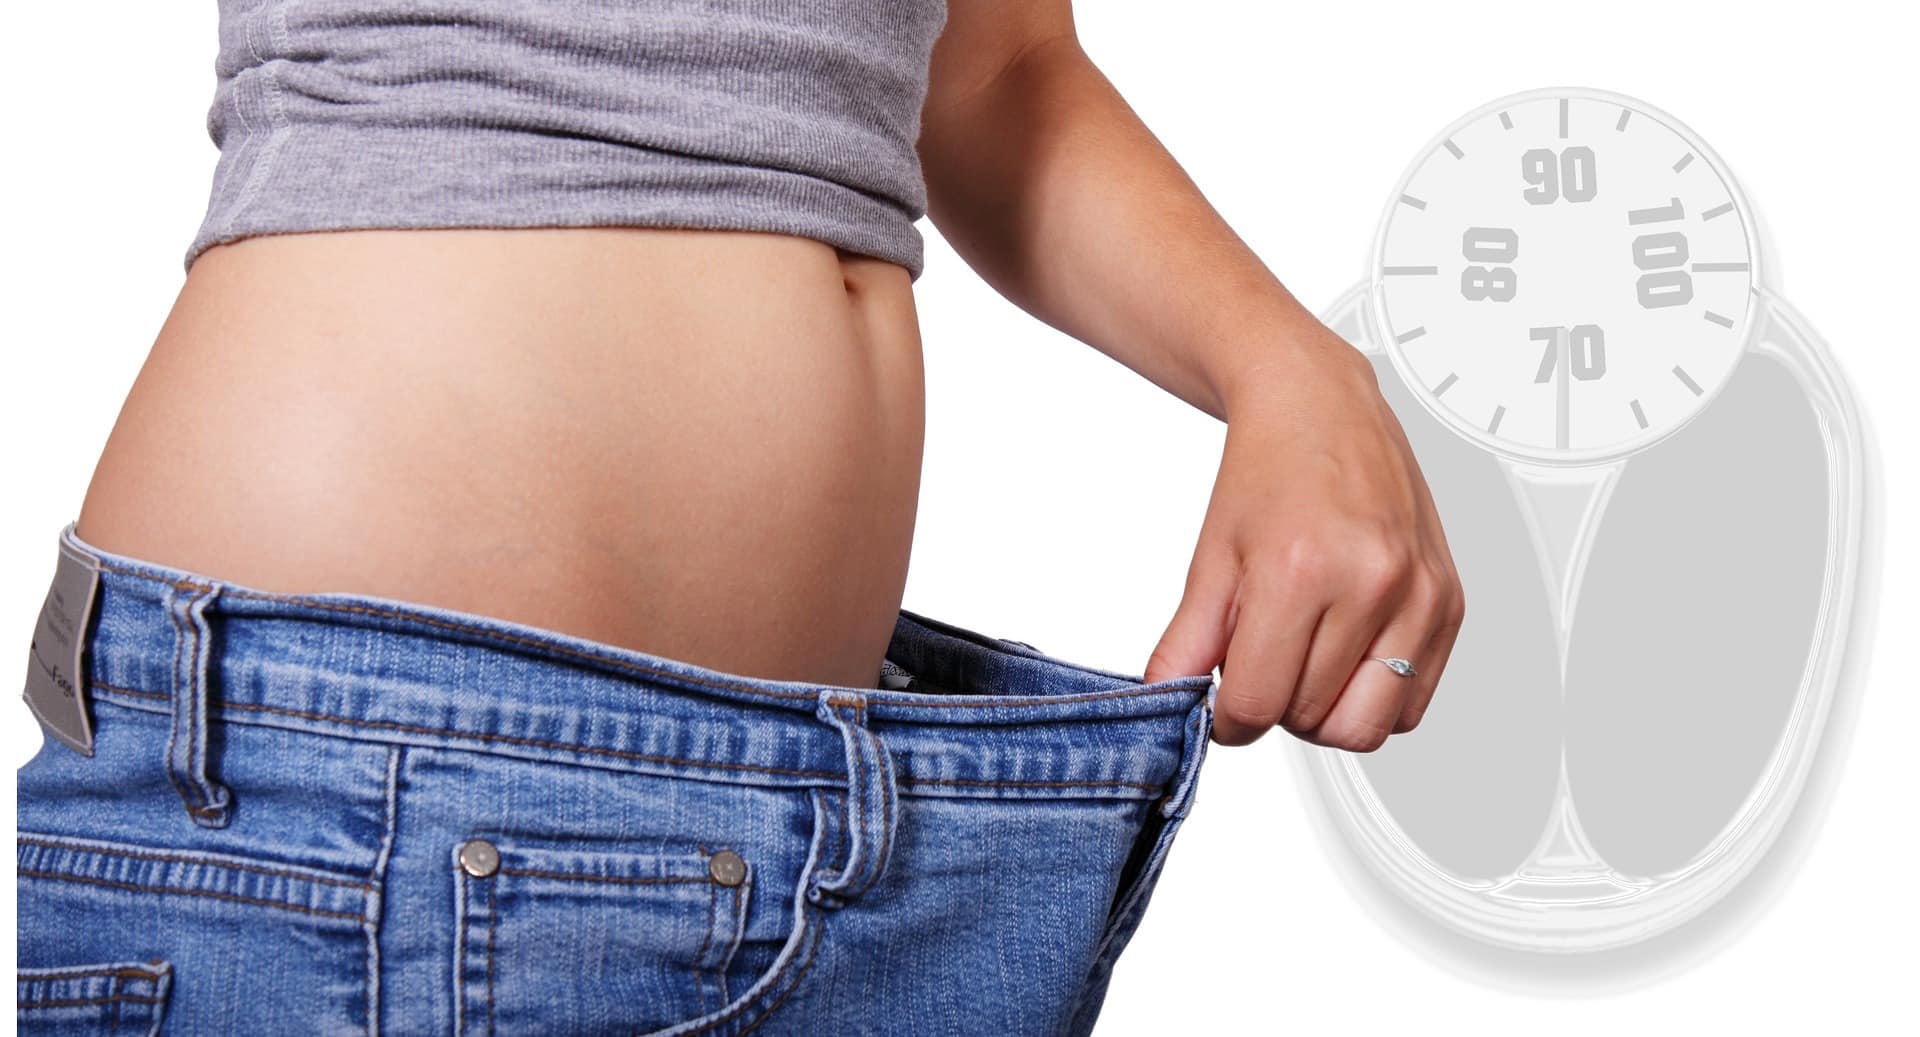 Lose Weight - Weight loss Program at Chicago Weight Loss Clinic